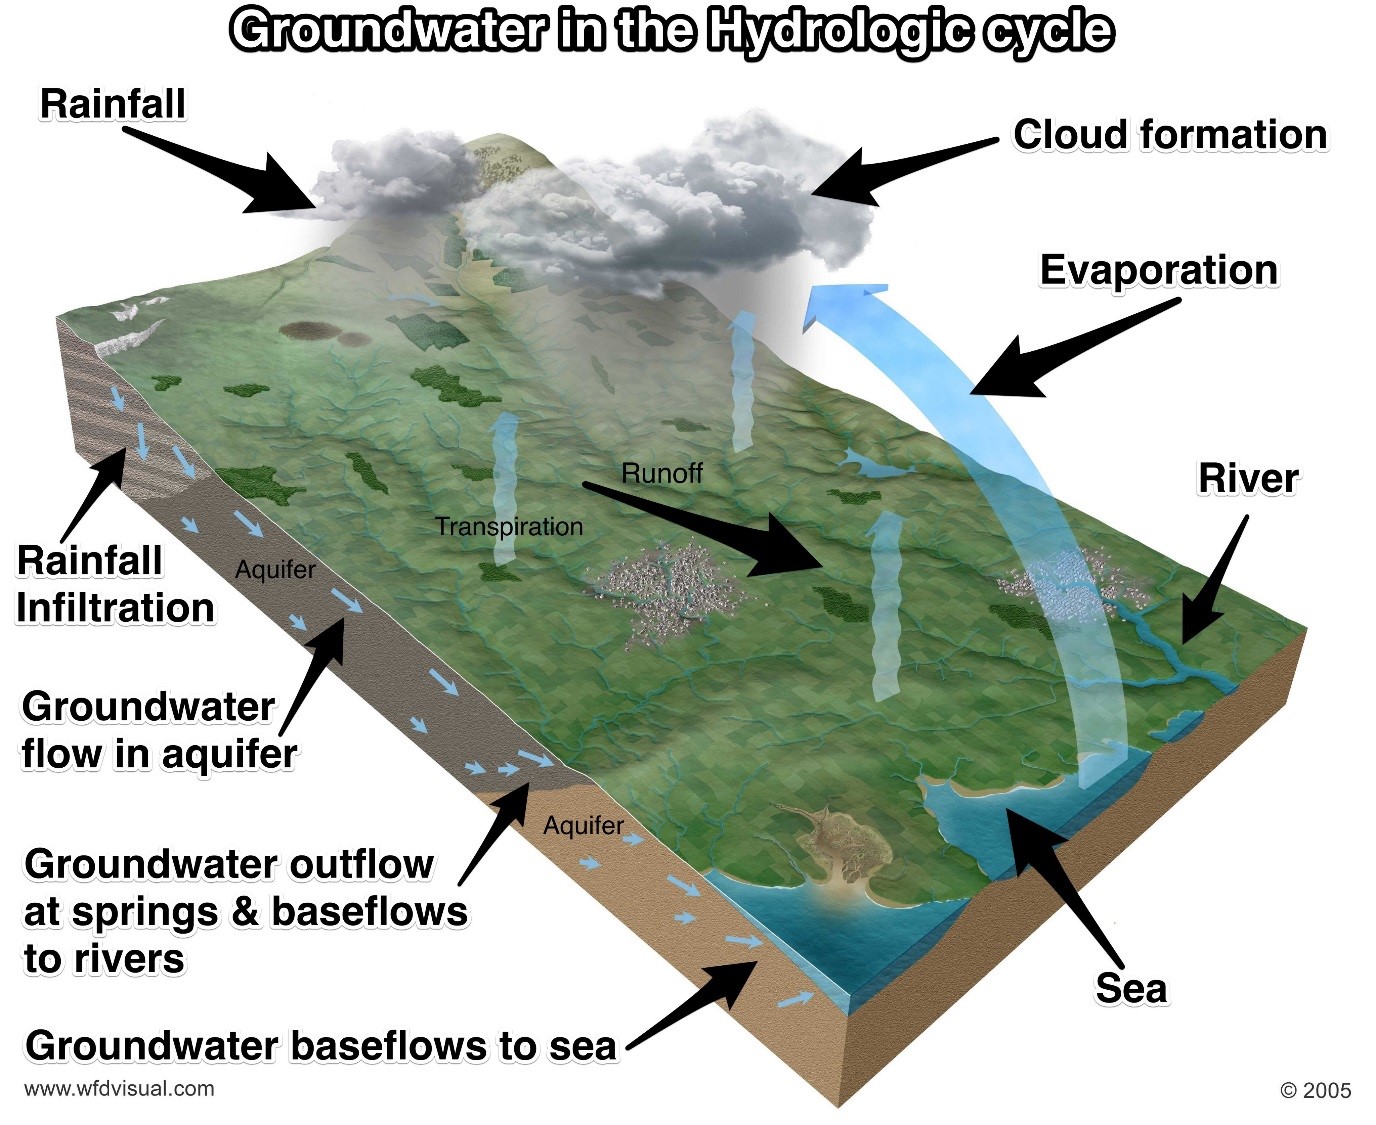 A diagram showing the water cycle, emphasising the role of groundwater. Rainwater infiltrates the ground, flows through the aquifer, outflows at springs and baseflows into rivers, as well as baseflow to the sea.